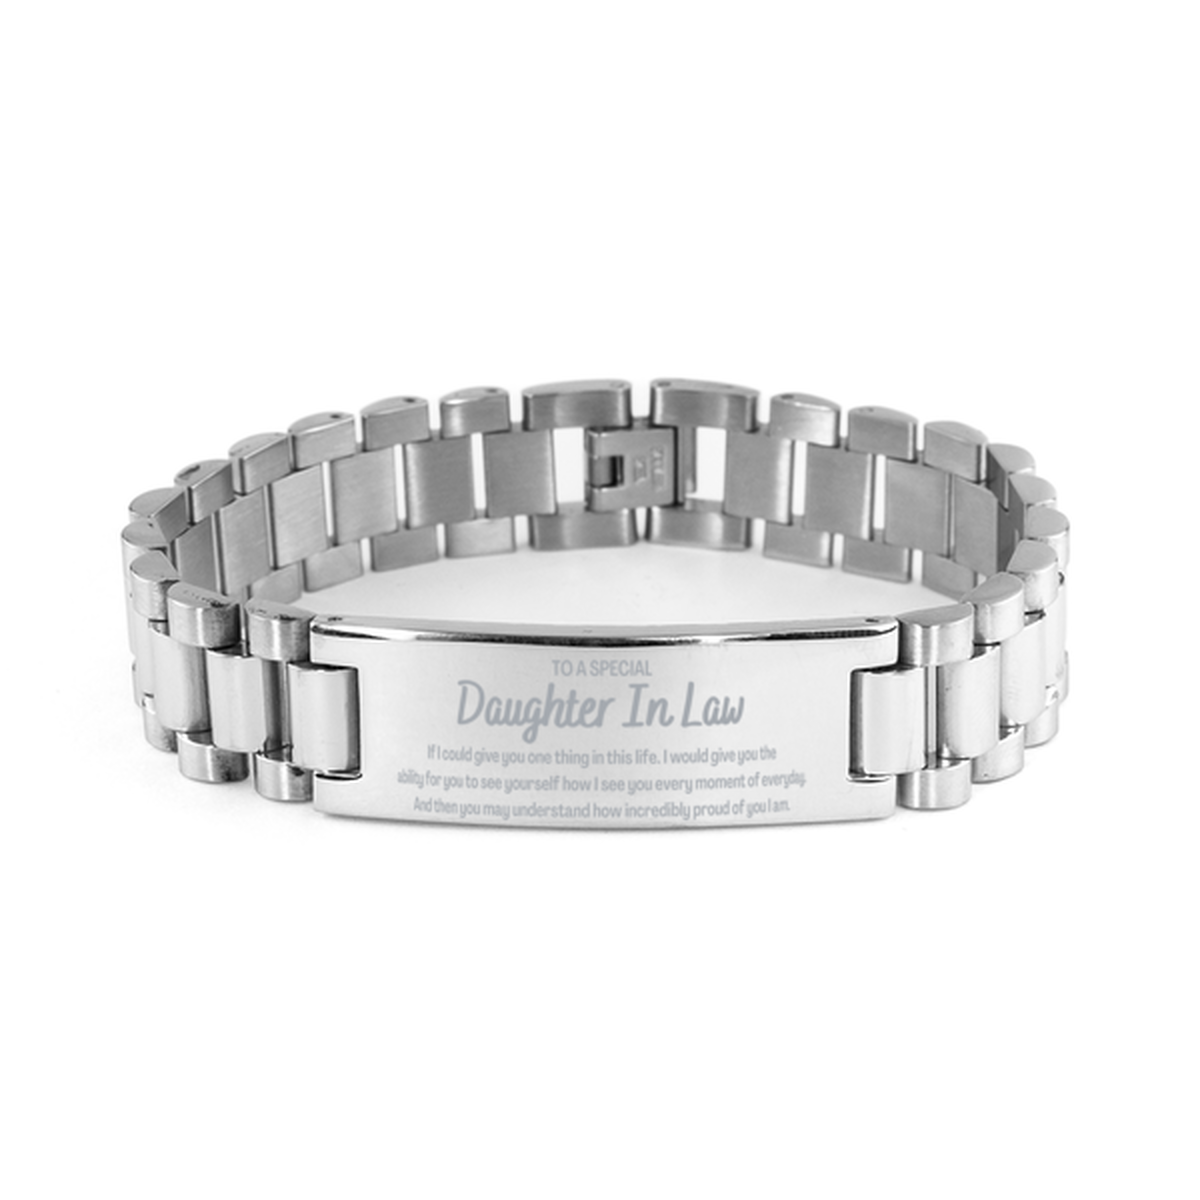 To My Daughter In Law Ladder Stainless Steel Bracelet, Gifts For Daughter In Law Engraved, Inspirational Gifts for Christmas Birthday, Epic Gifts for Daughter In Law To A Special Daughter In Law how incredibly proud of you I am